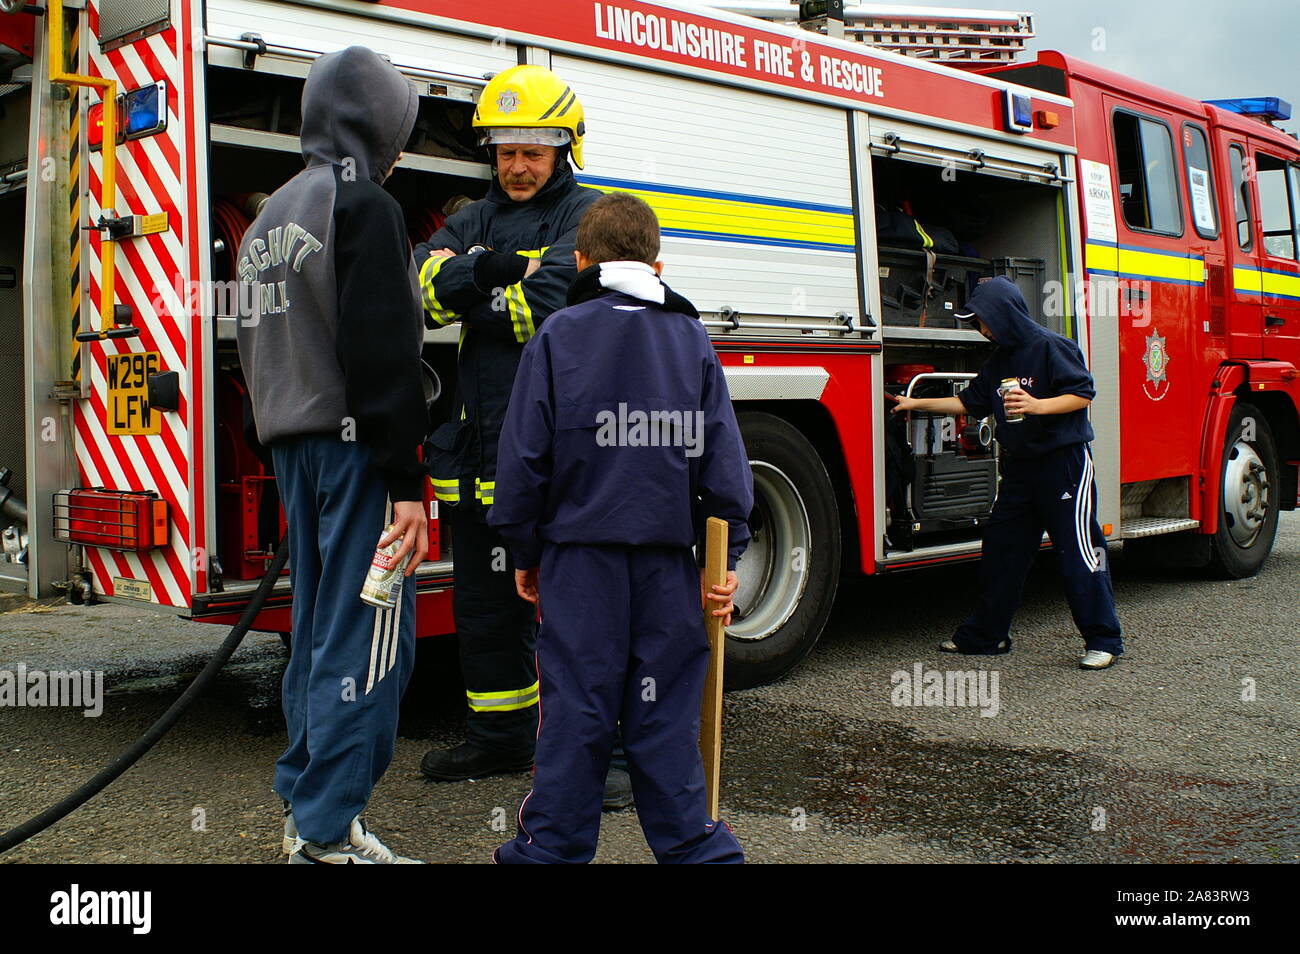 attack on fire fighters, Assault on Emergency Workers Stock Photo